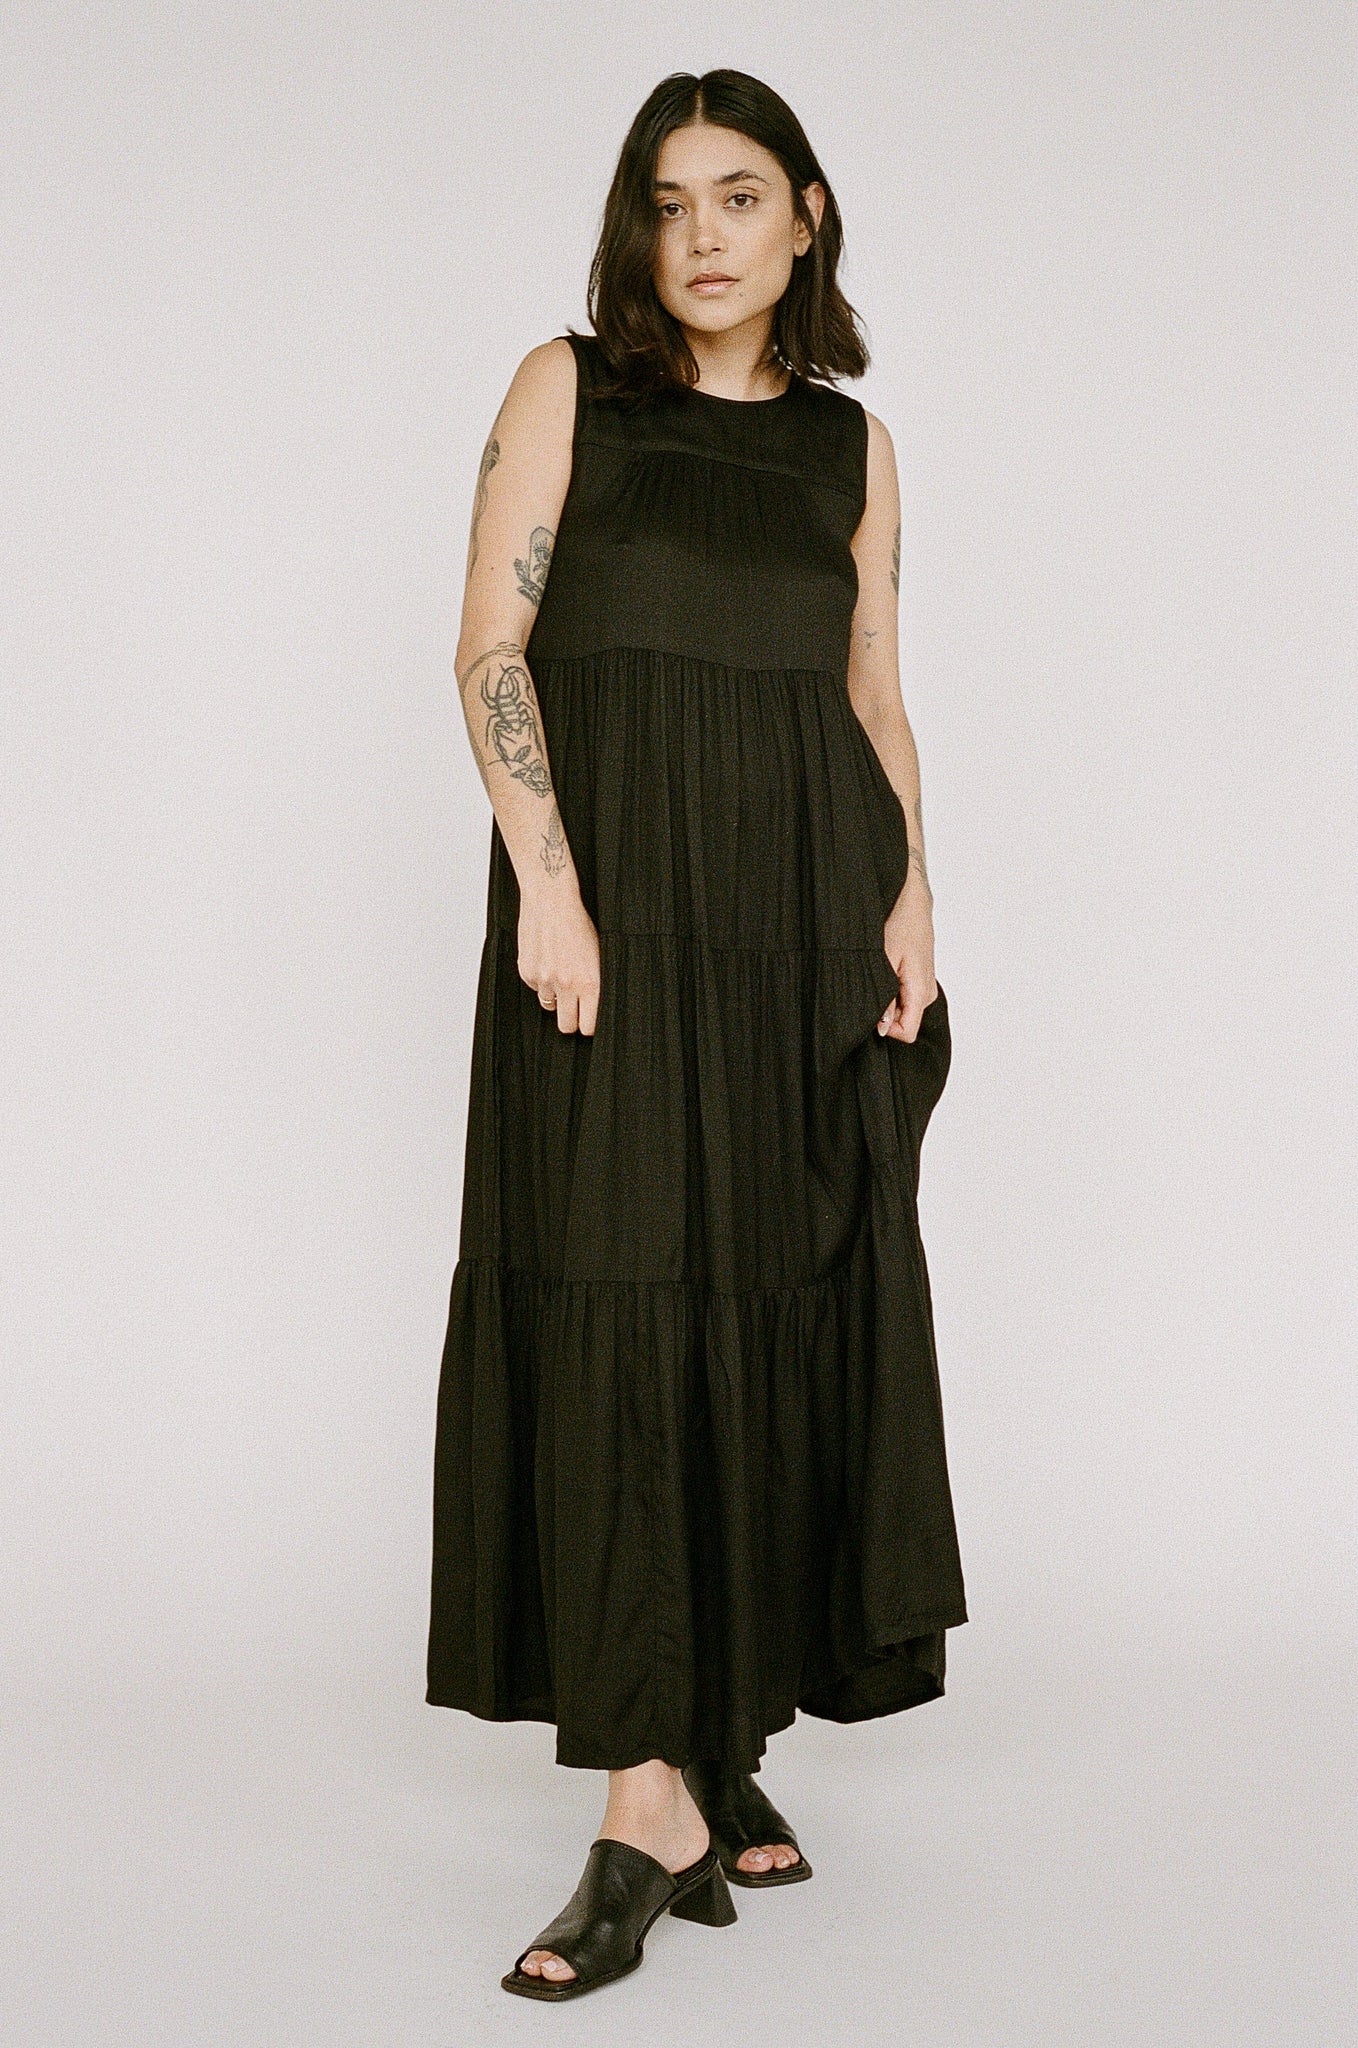 Woman in a Tiered Maxi Dress - Black handmade in India, standing against a neutral background.